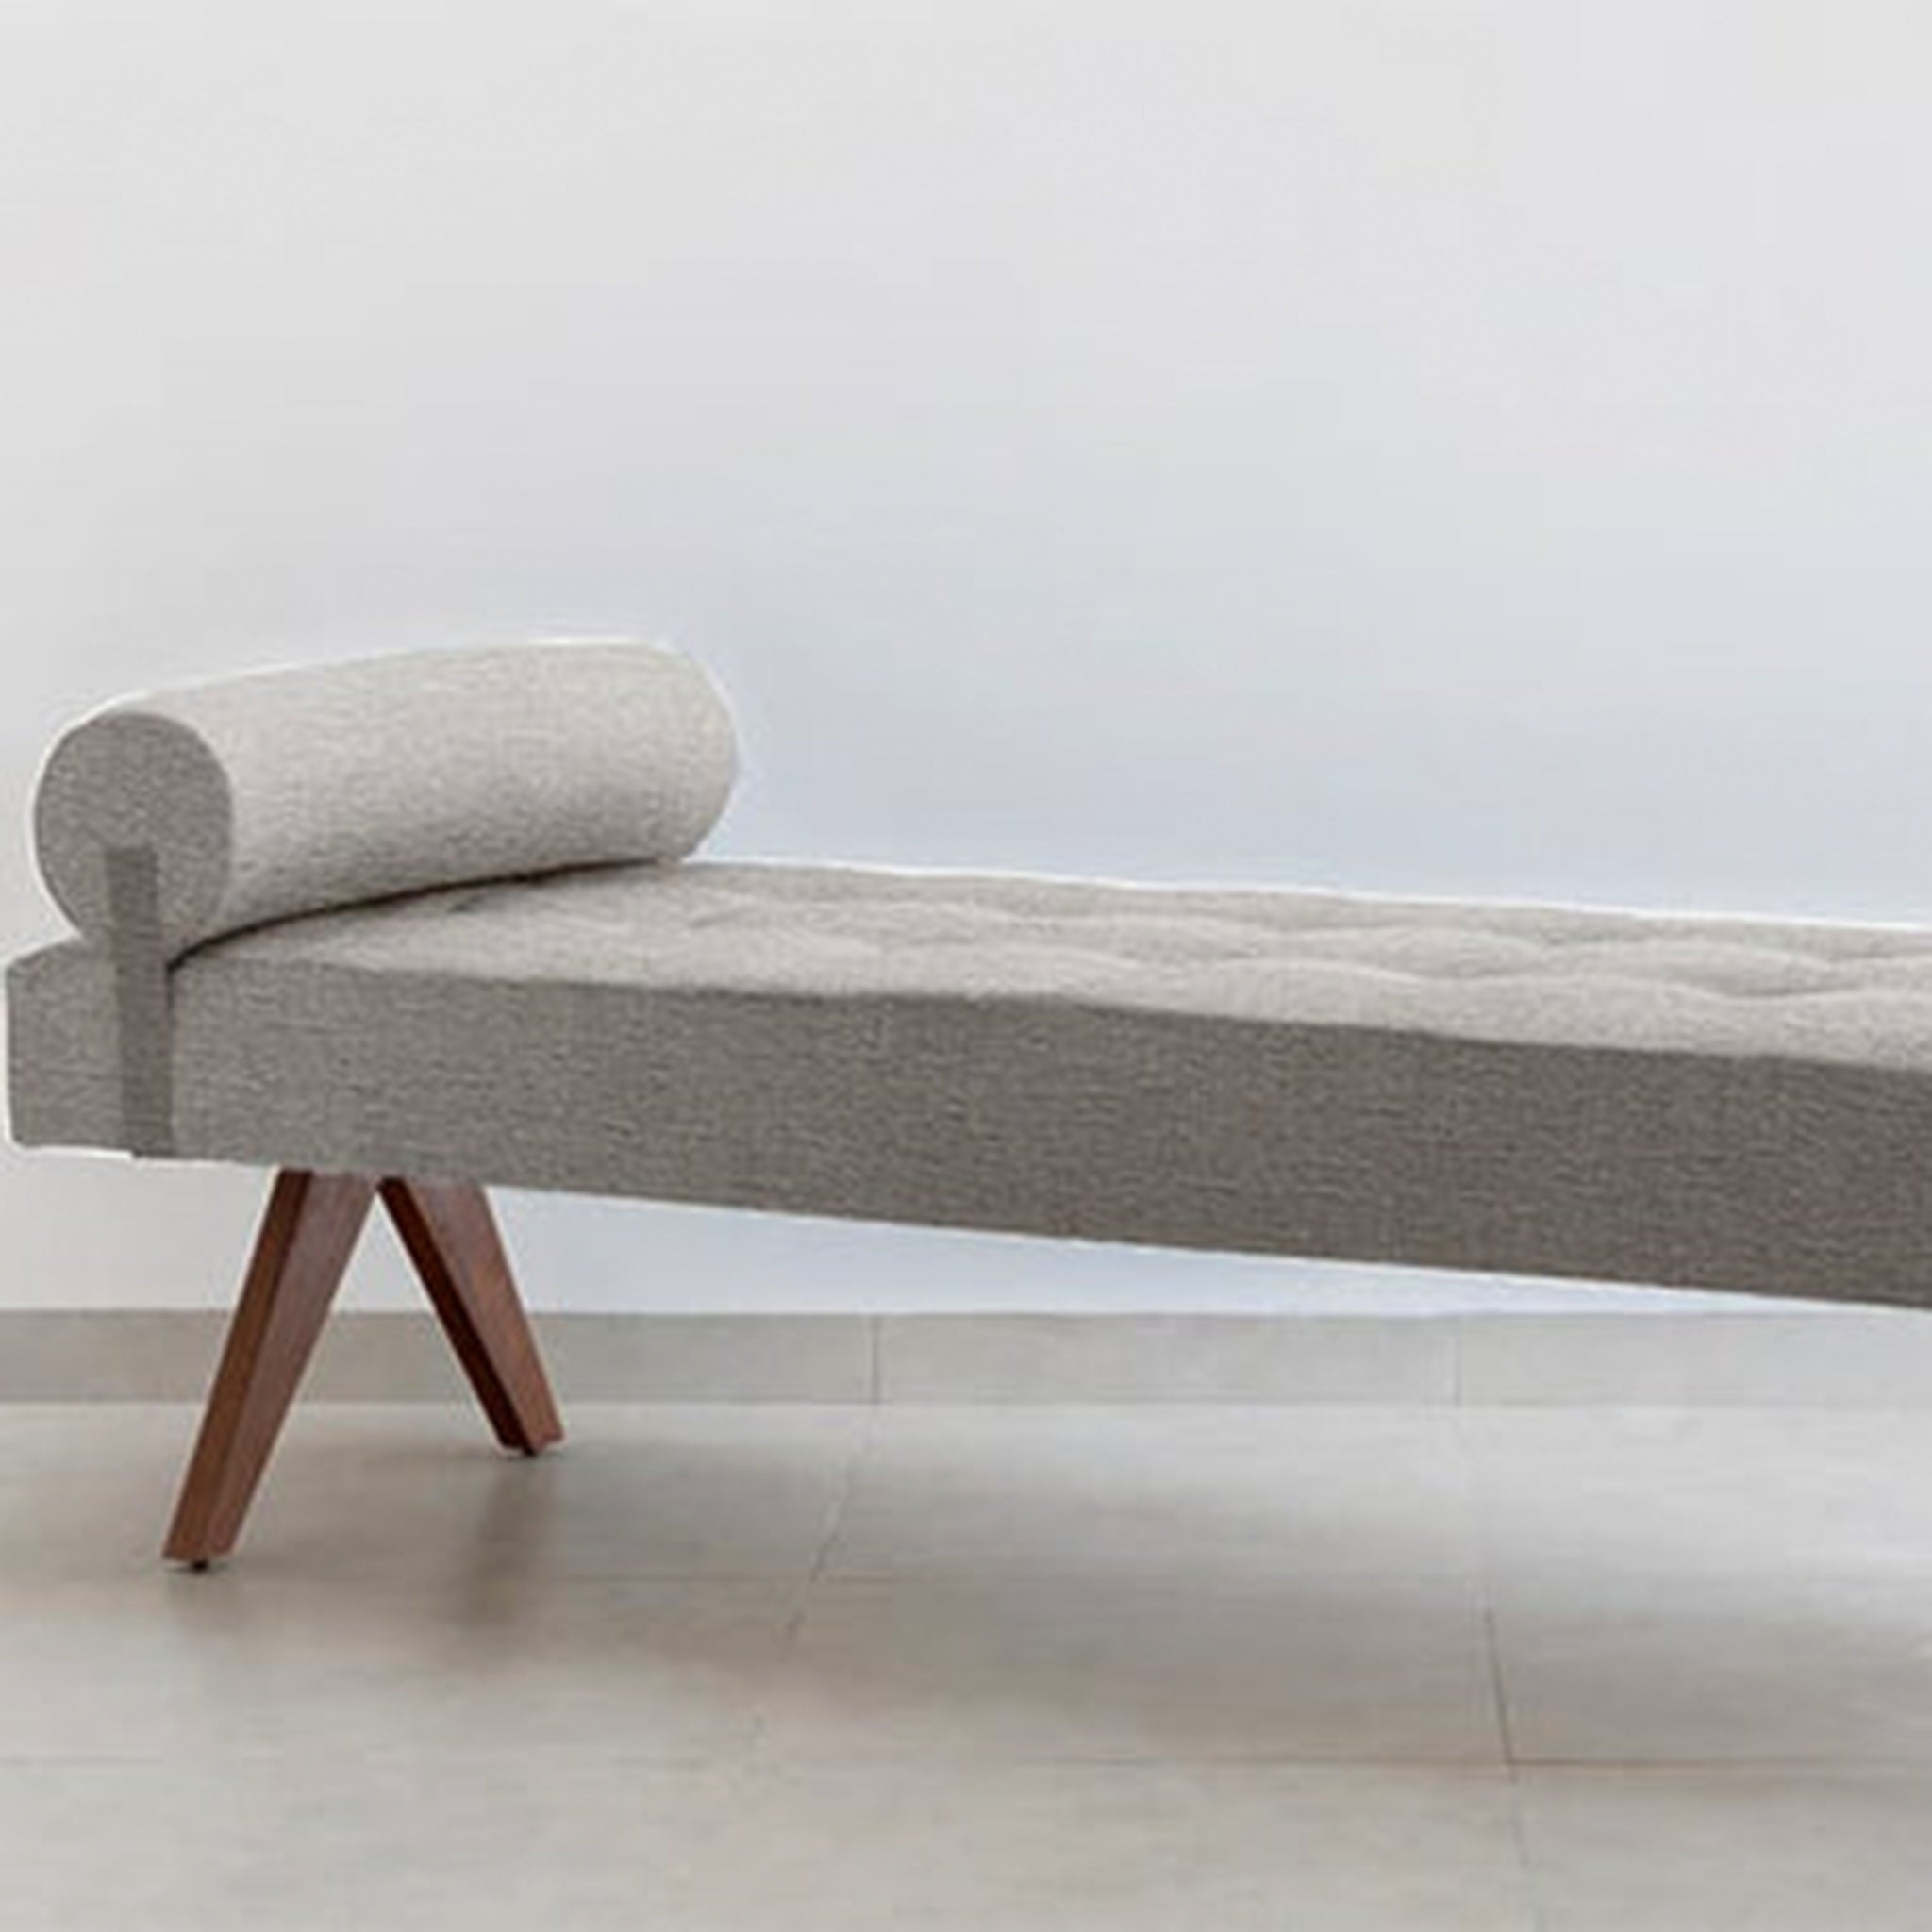 The Jack Daybed for modern living rooms